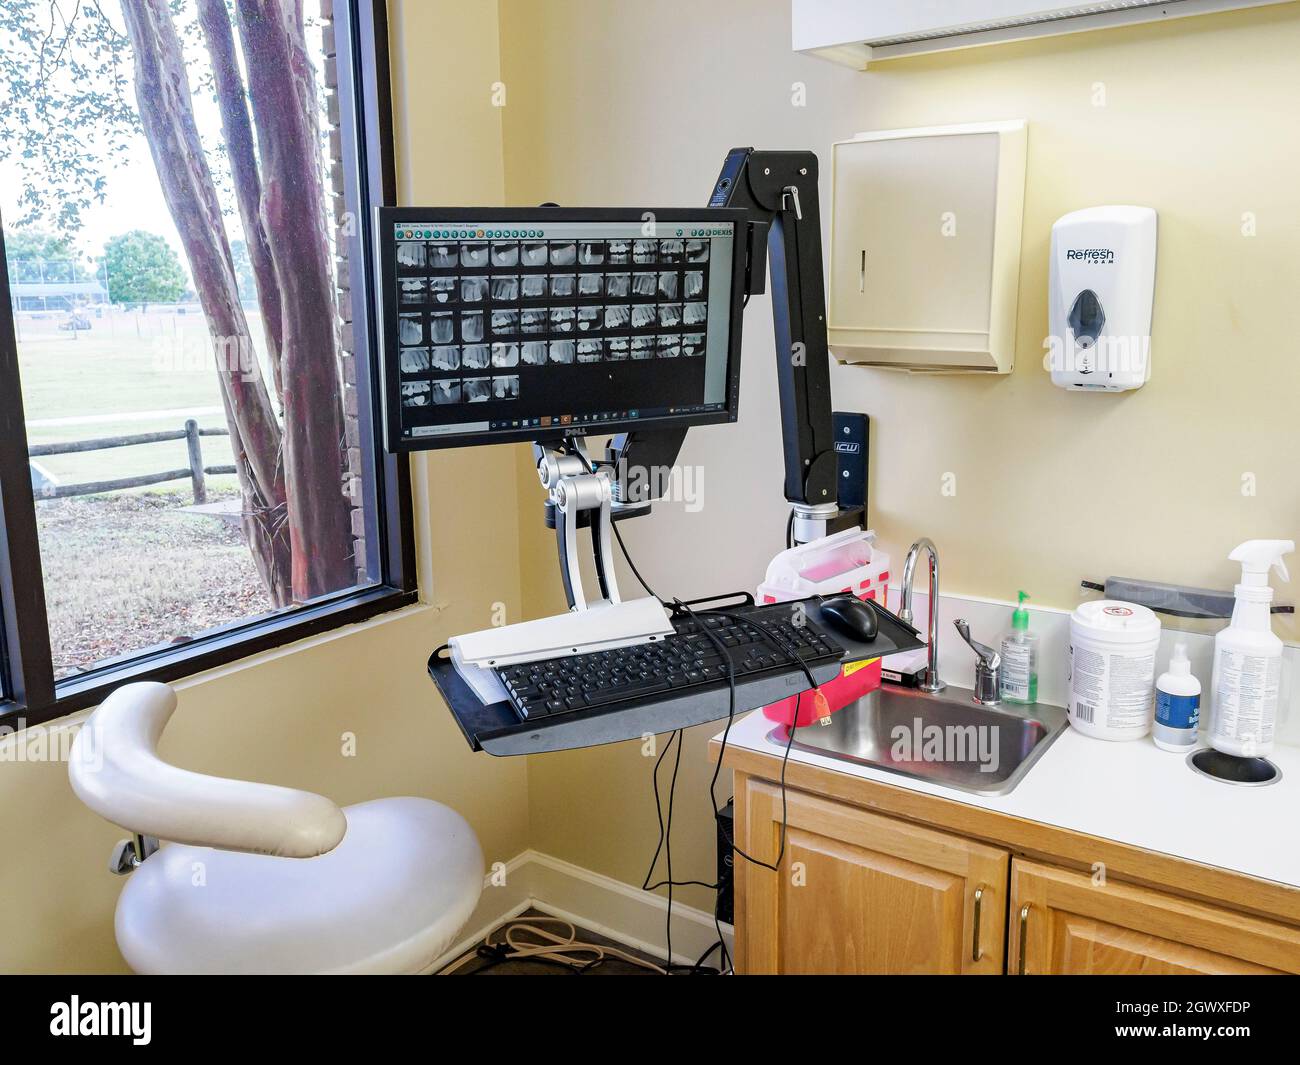 Patient digital dental x-ray or x-rays on a computer screen in dental or dentist exam room. Stock Photo